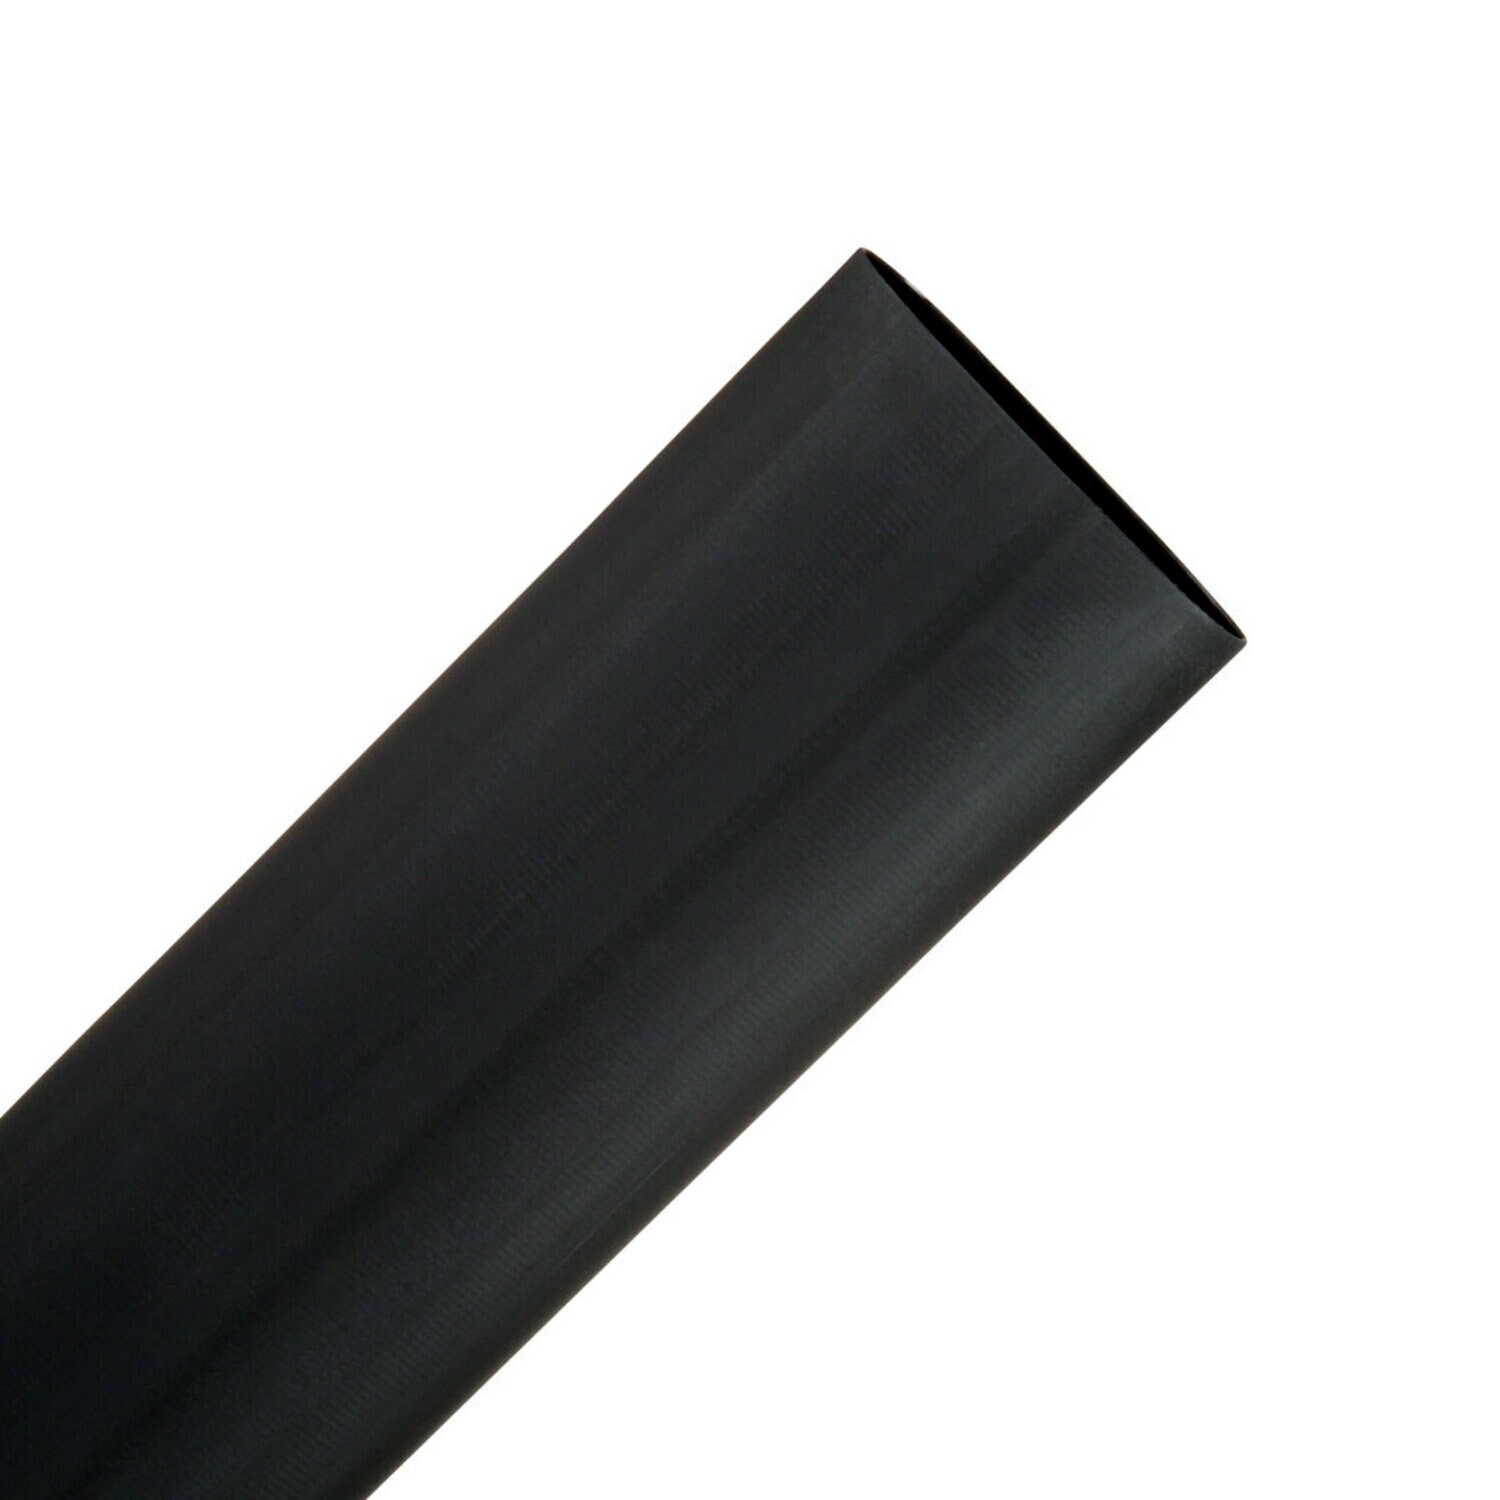 7000133586 - 3M Thin-Wall Heat Shrink Tubing EPS-300, Adhesive-Lined, 1
1/2-48"-Black-5 Pcs, 48 in length sticks, 5 pieces/case